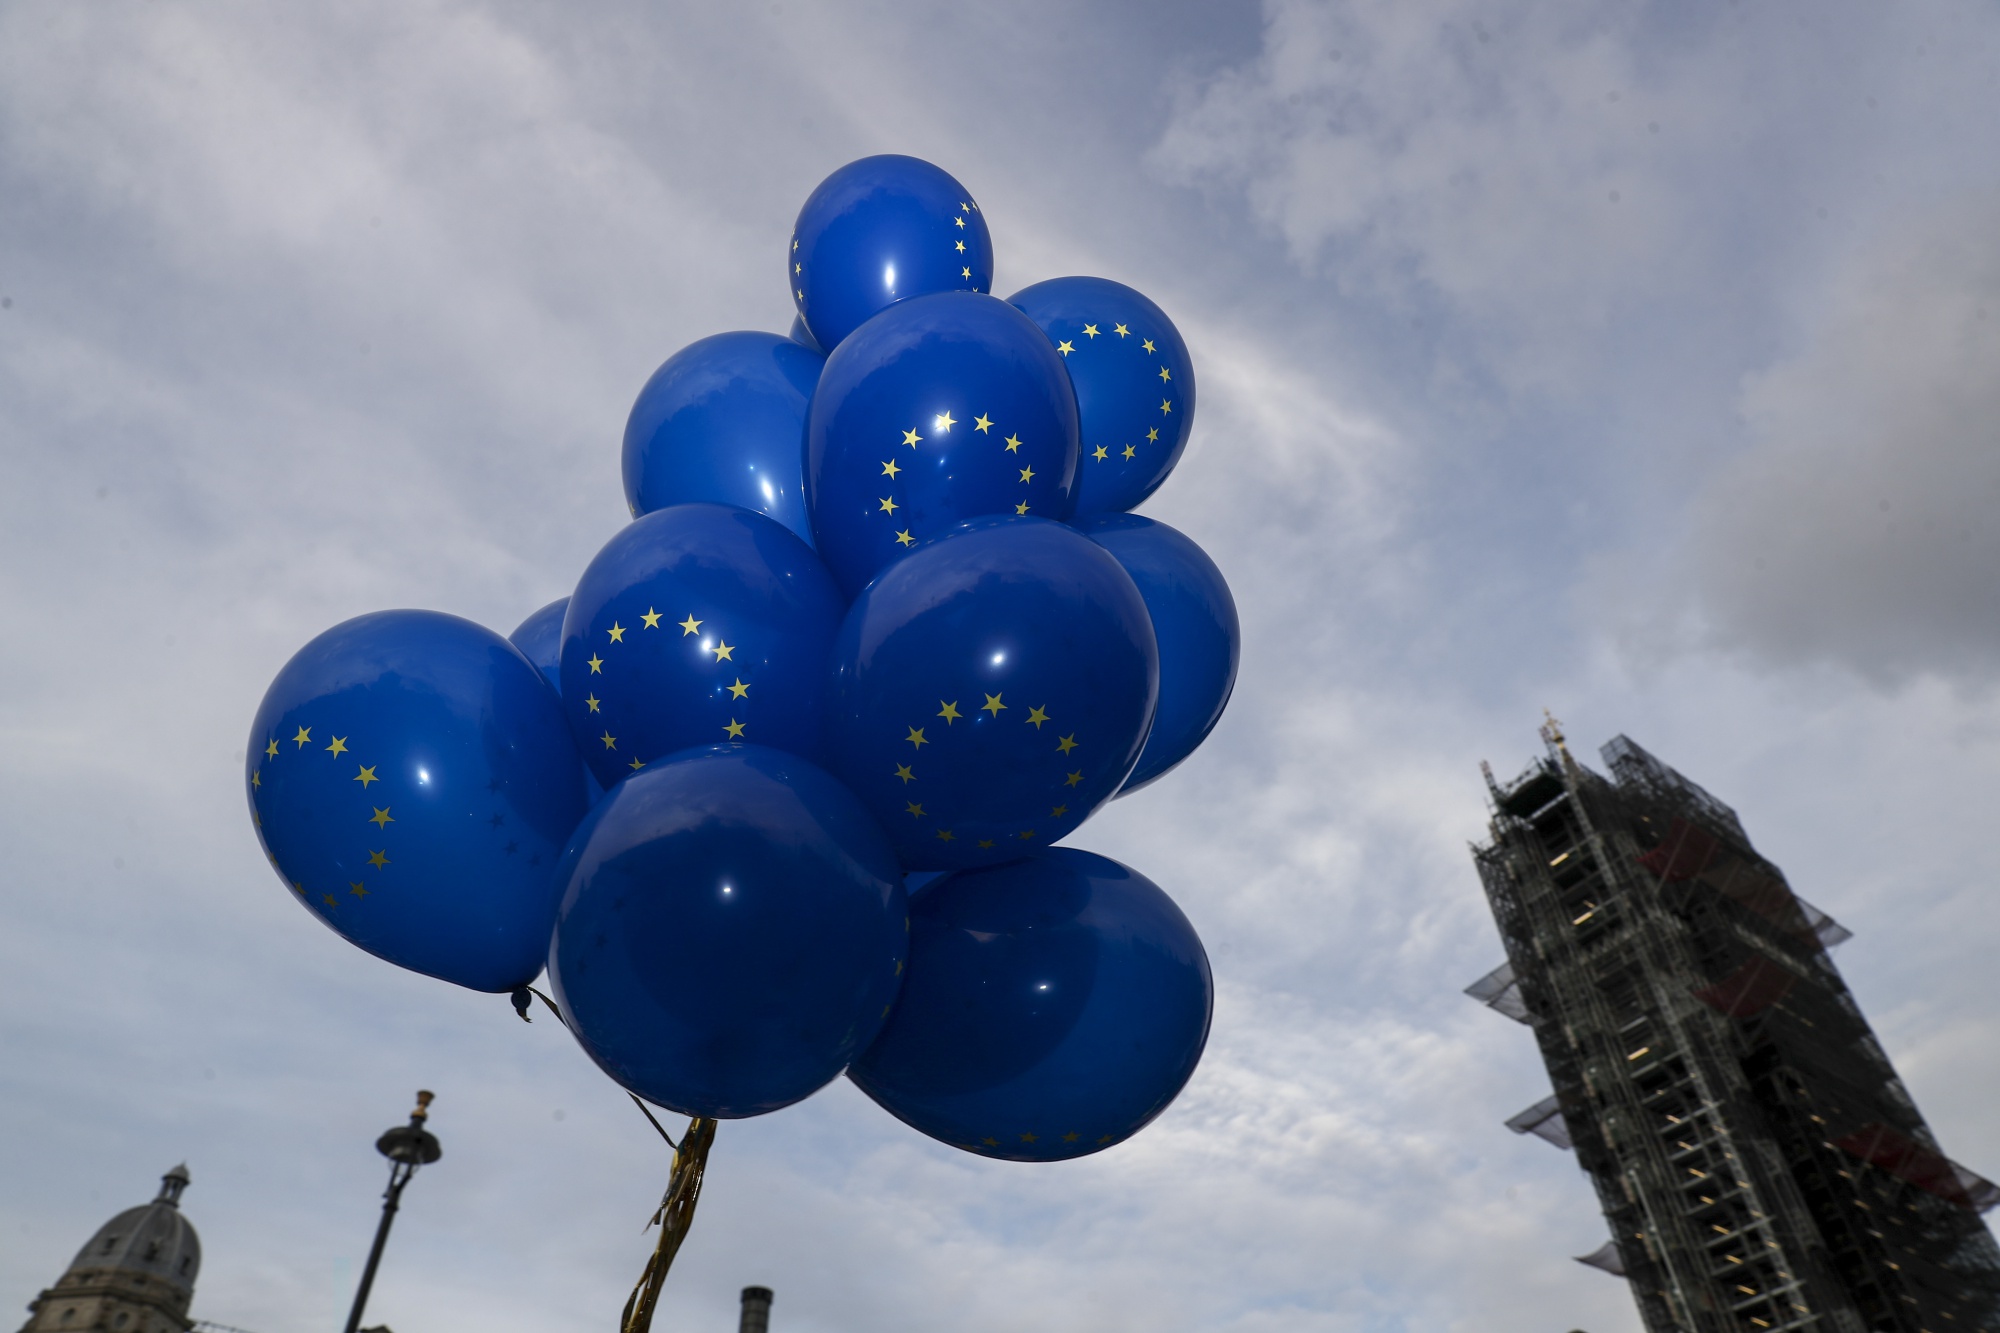 A set of balloons featuring the design of European Union (EU) flag float near the Houses of Parliament in London.